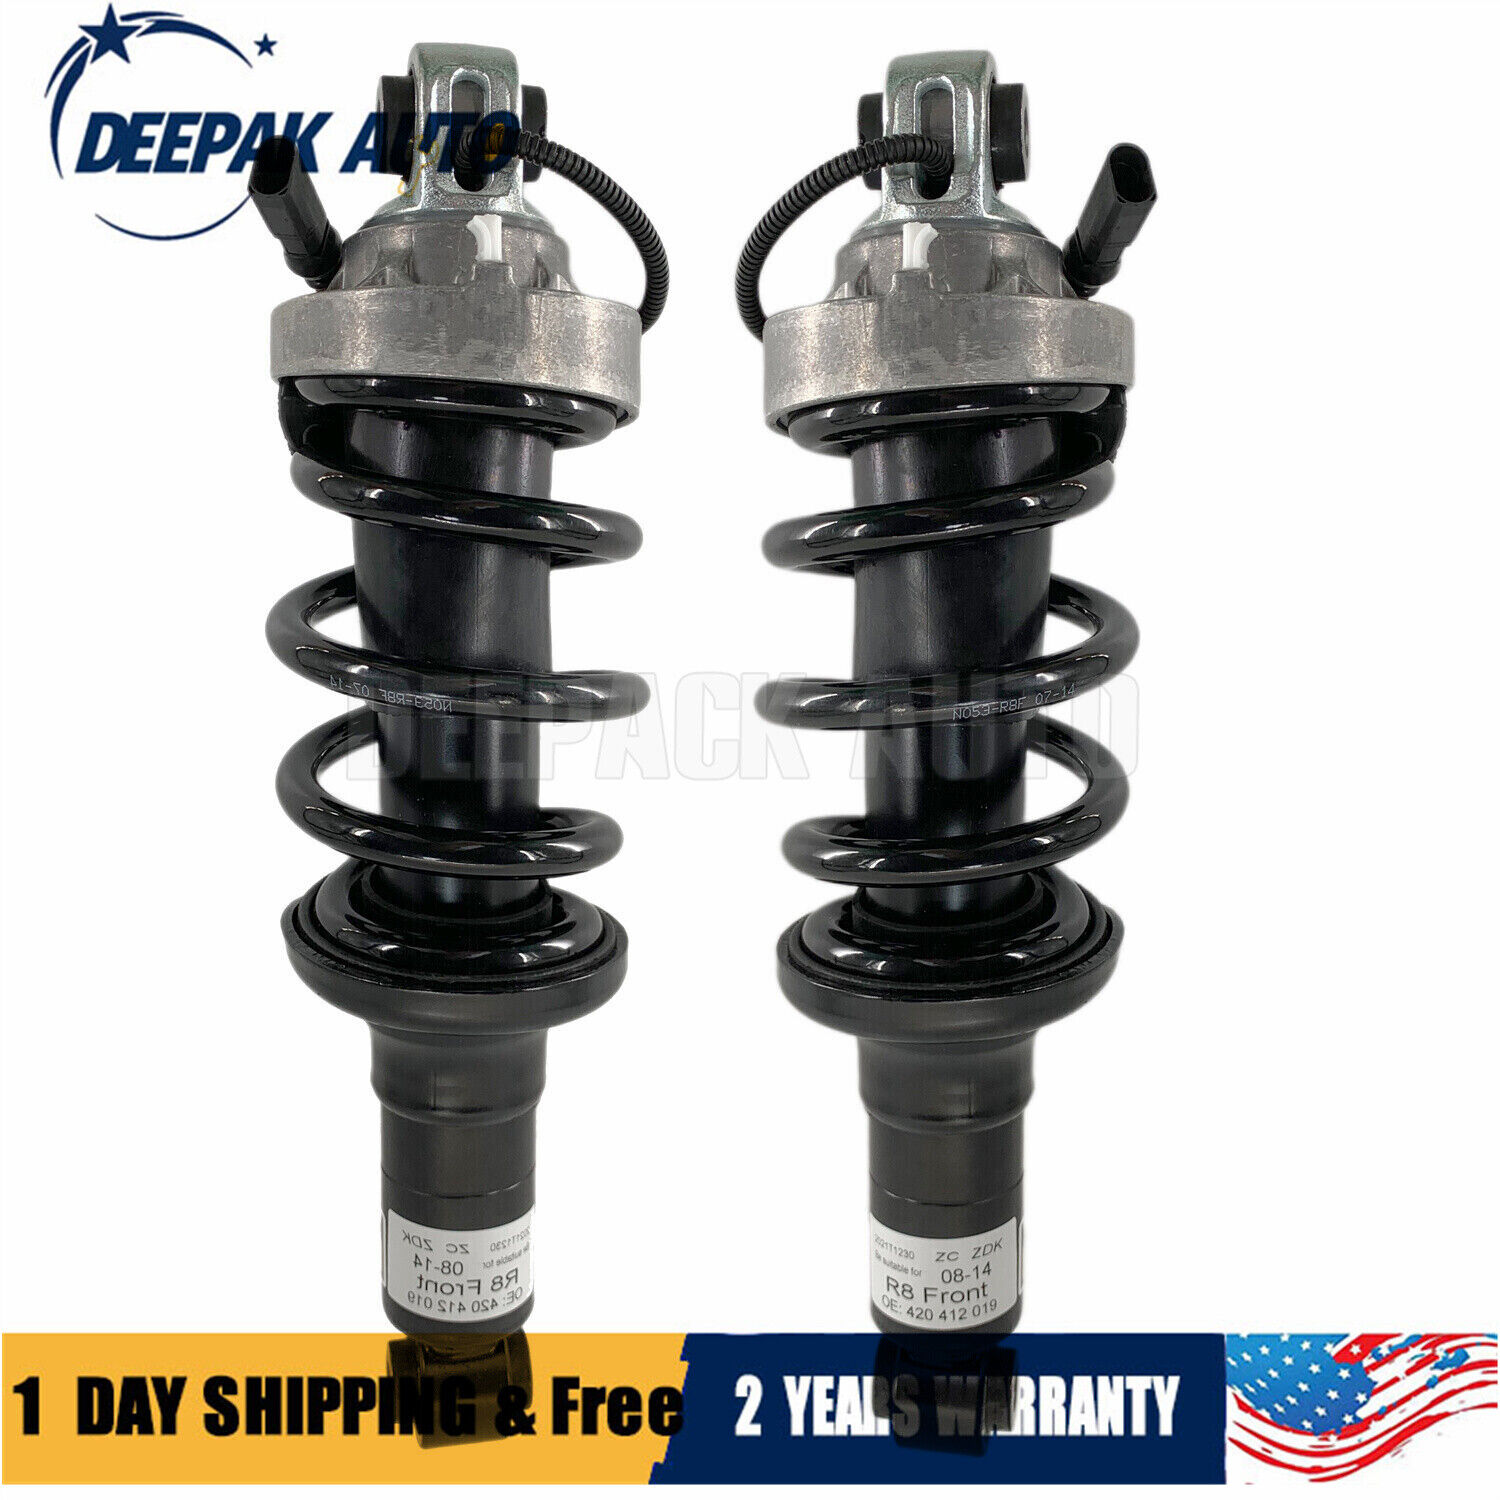 Pair For 2007-12 Audi R8 Front Air Suspension Shock Absorber 420412019 420412020